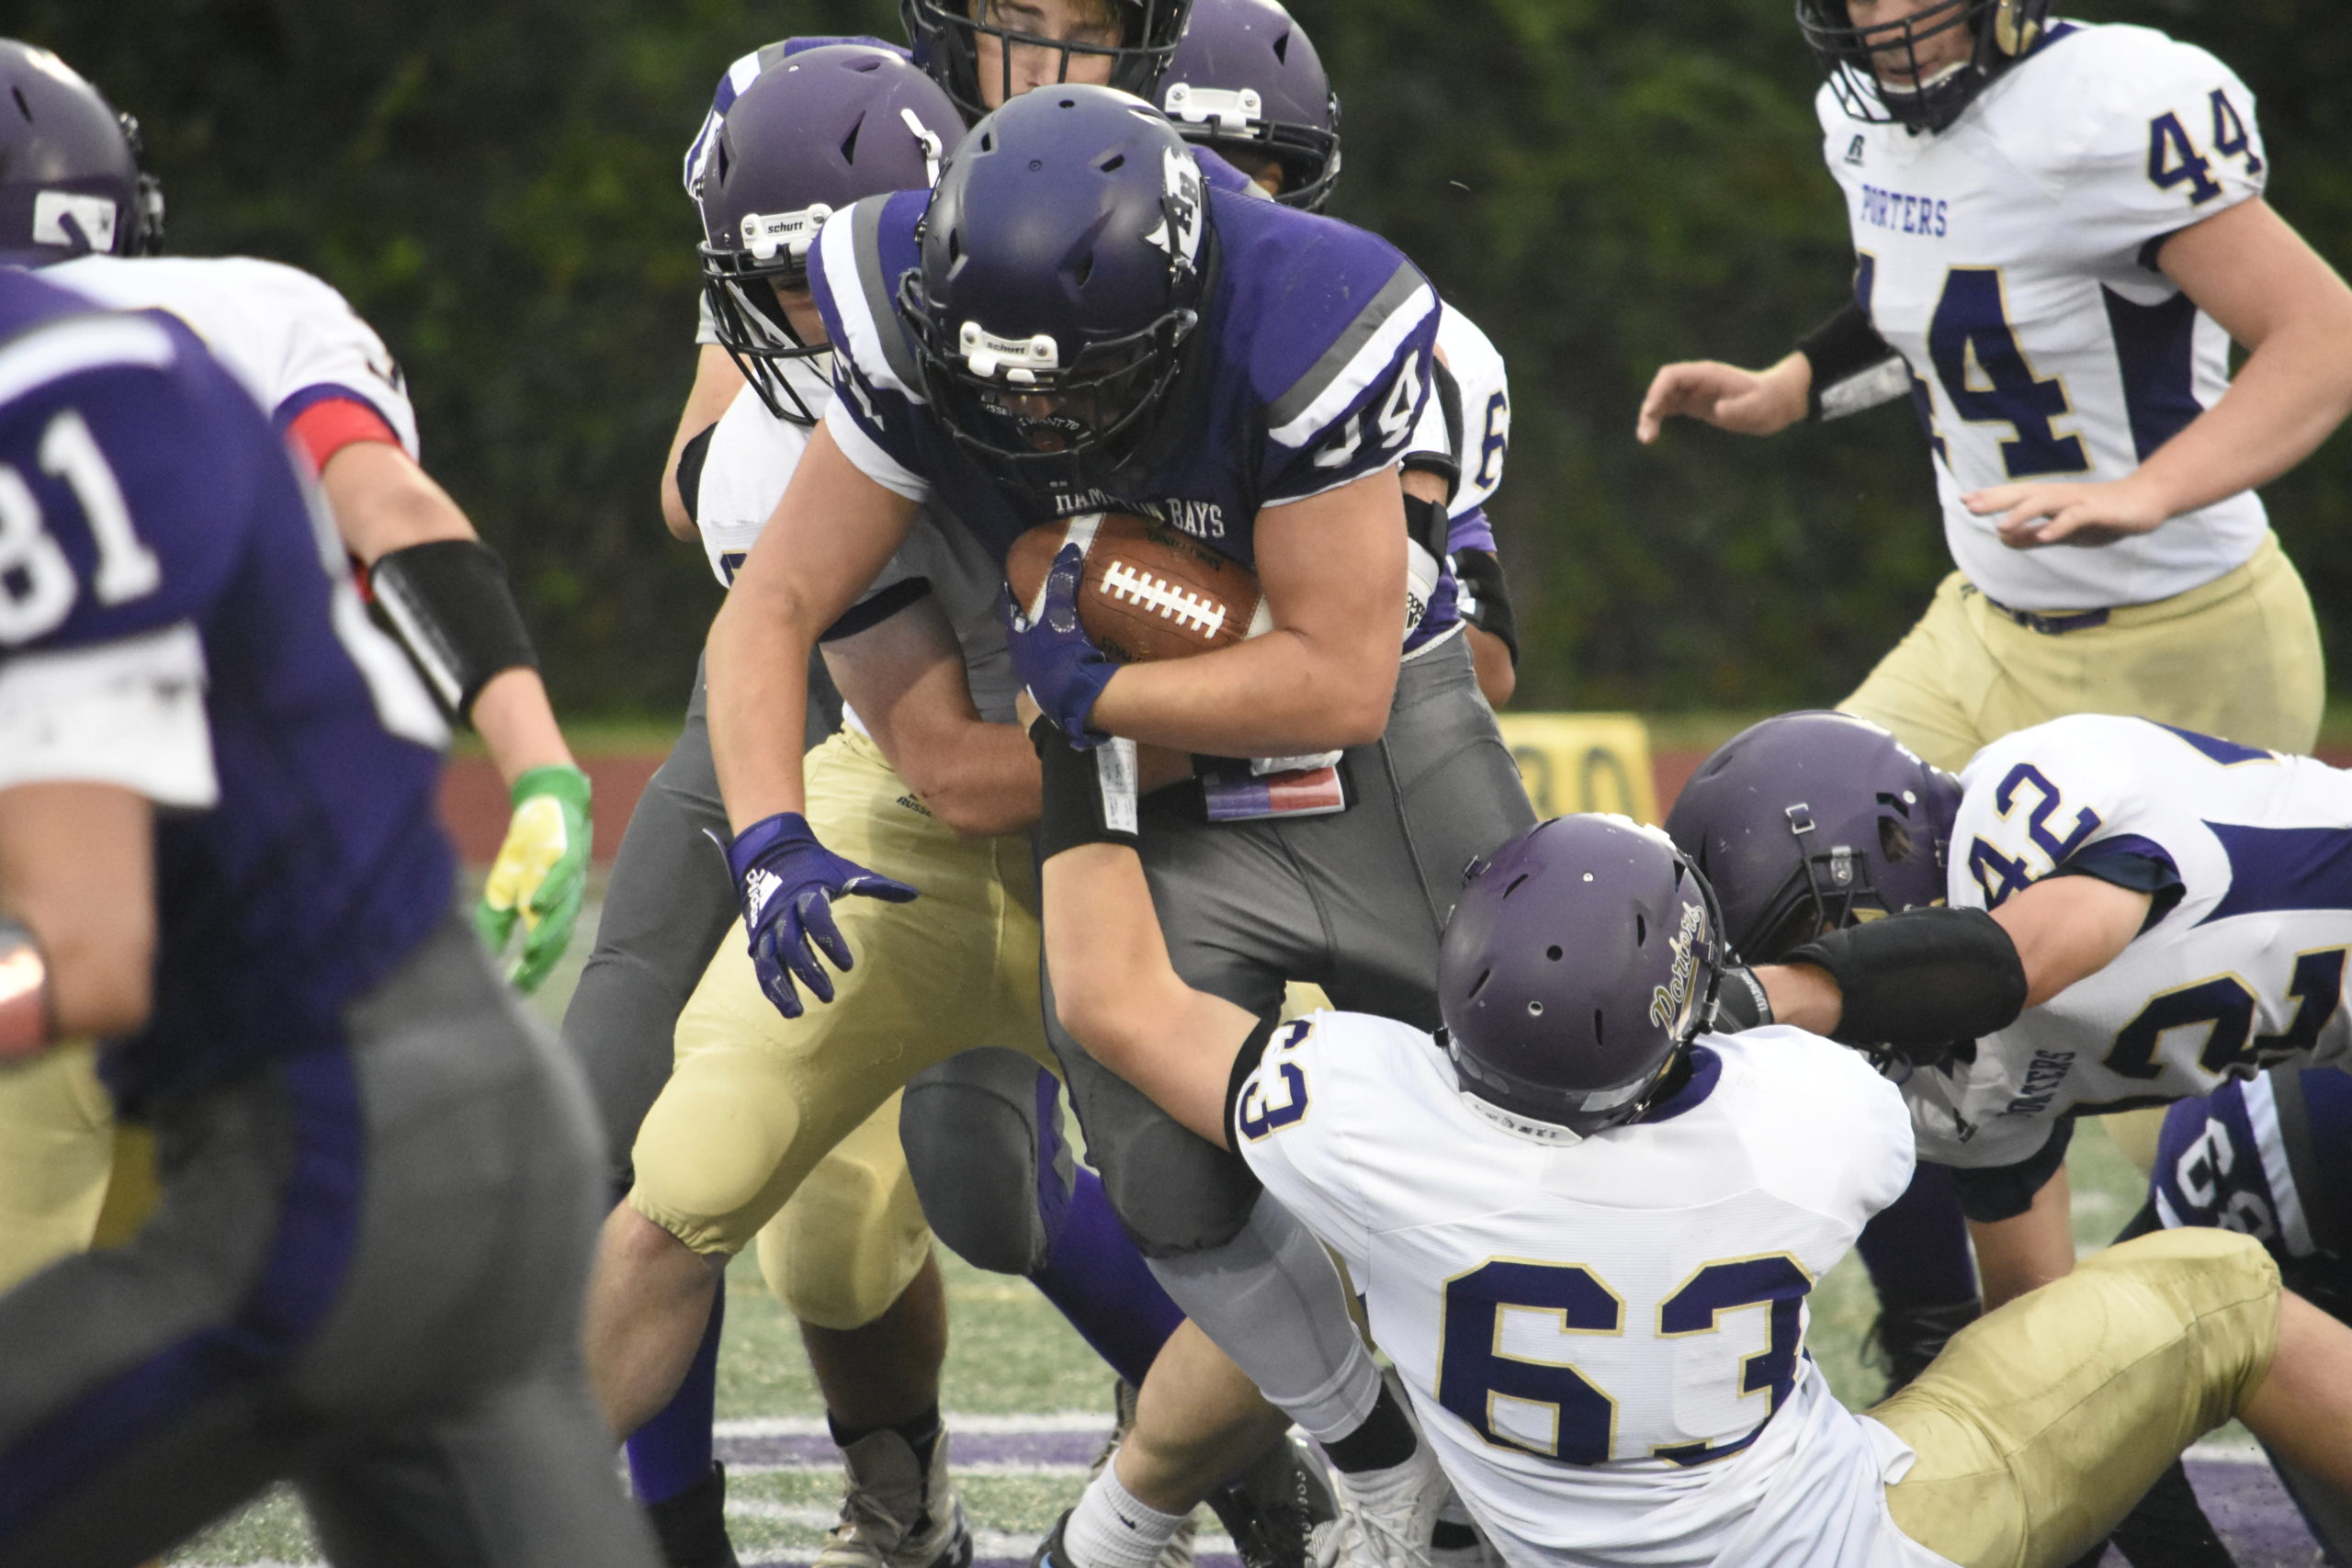 Cooper Shay was an All-County football player for the Baymen this past fall.